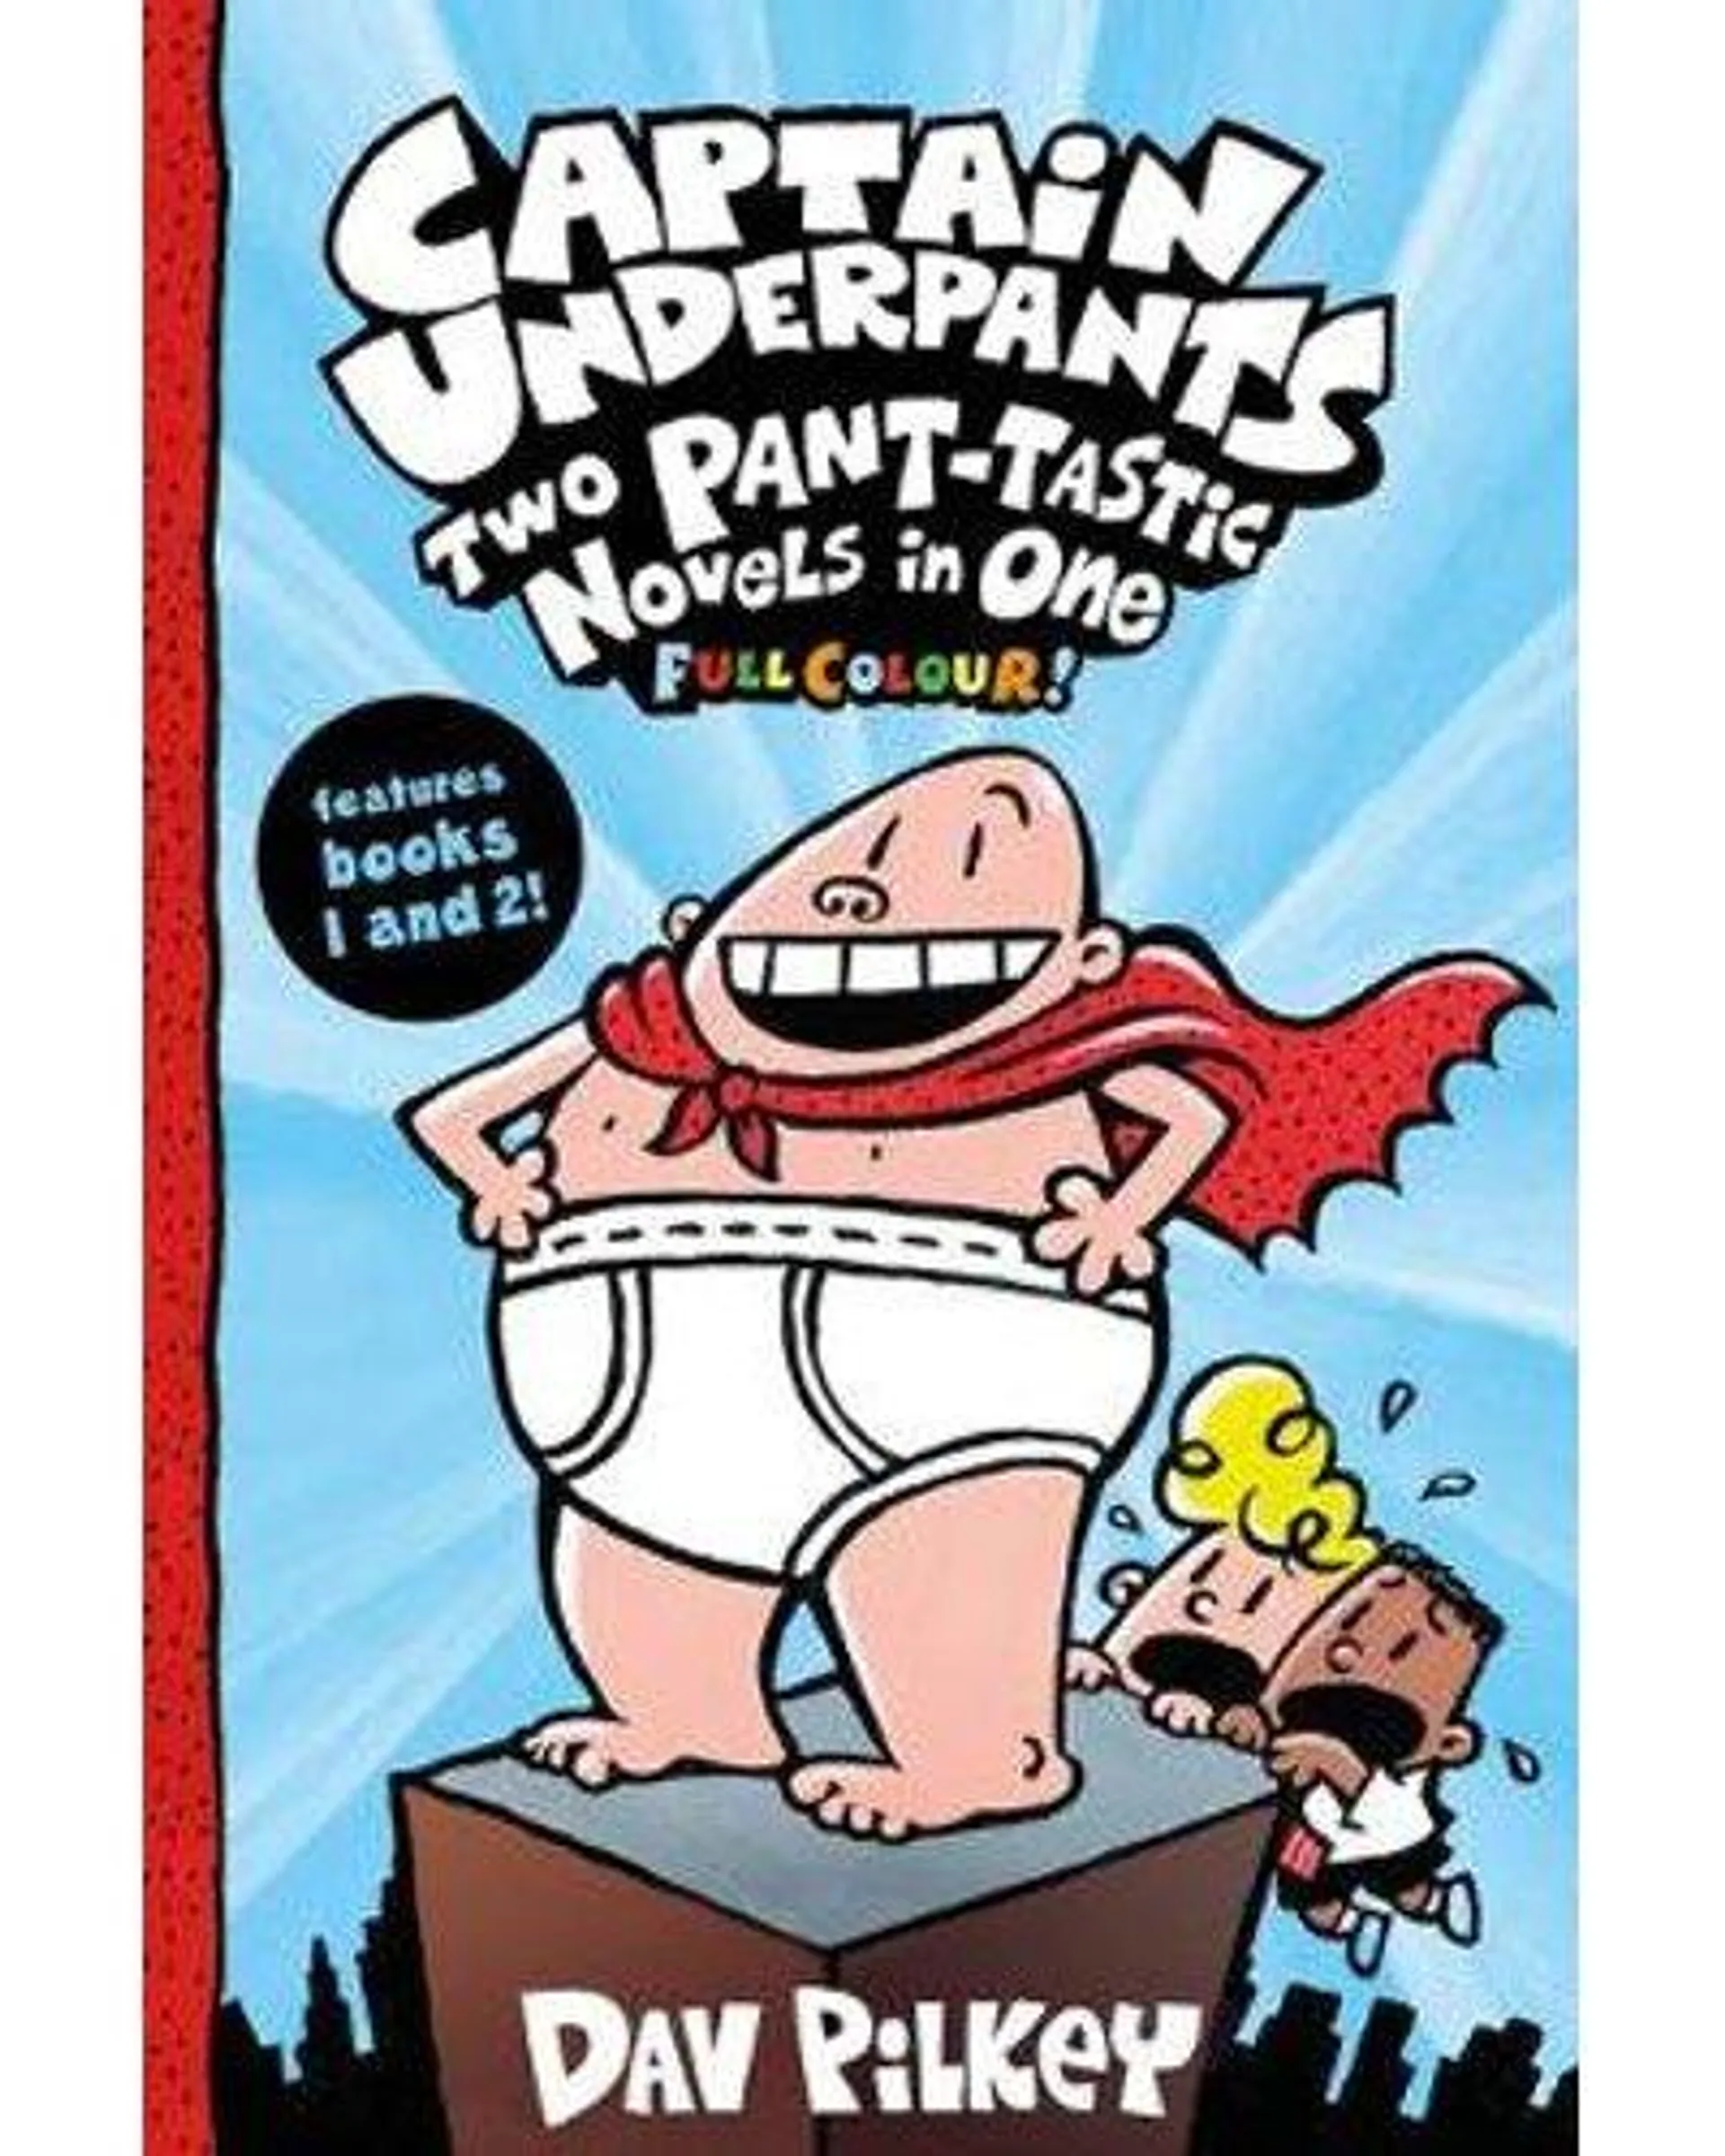 Captain Underpants: Two Pant-tastic Novels in One (Full Colour!) (Paperback)